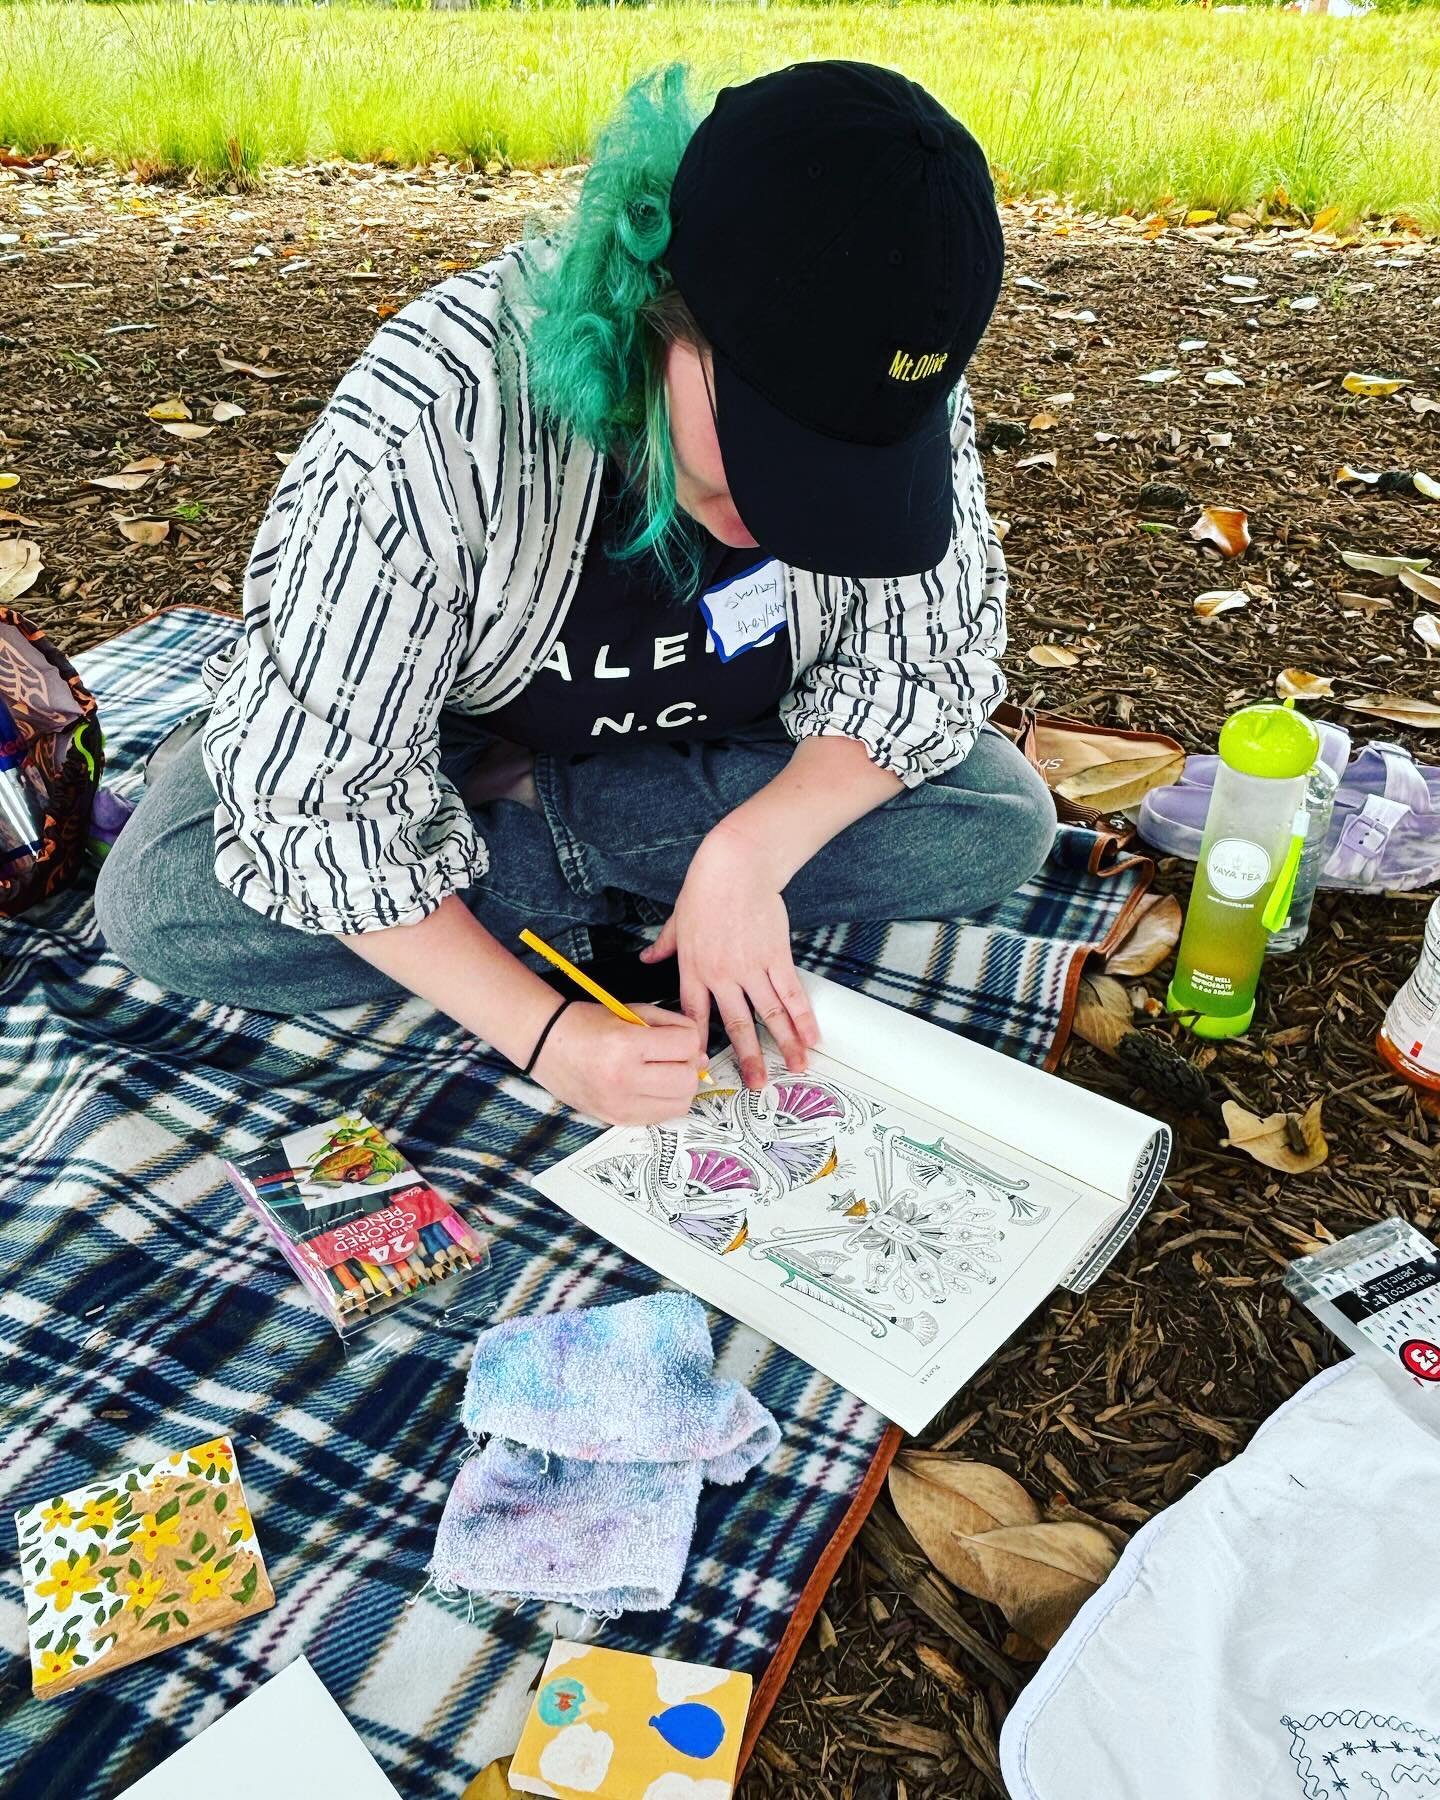 Today was beautiful weather for making art! Come see us at our next meeting at the end of May!!